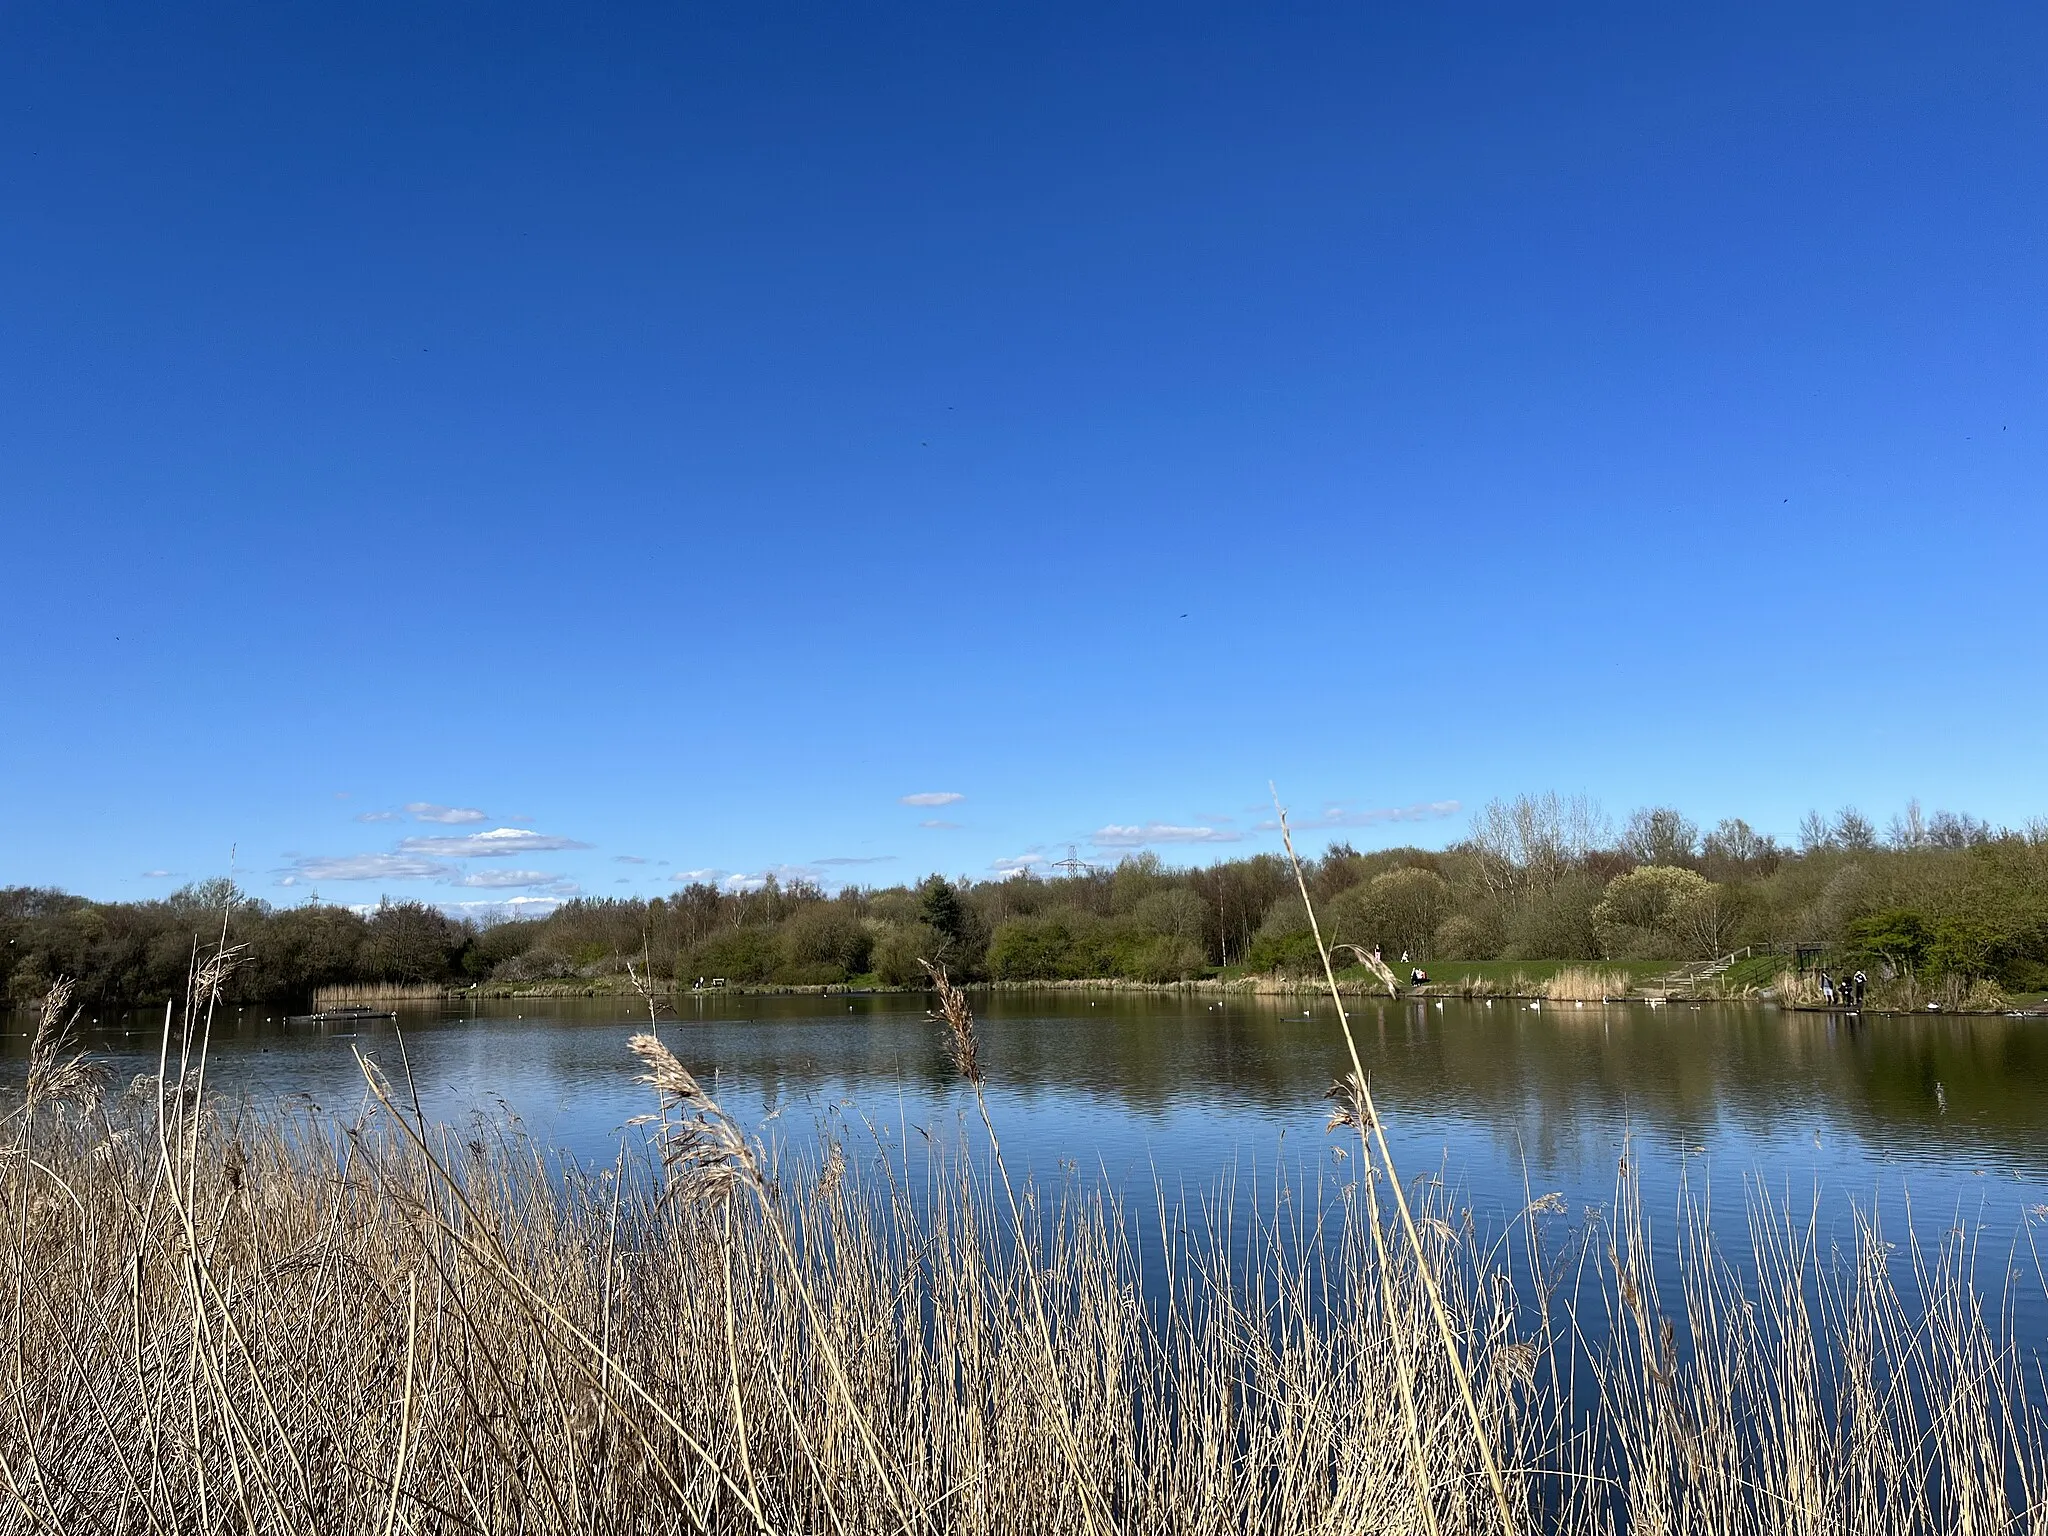 Photo showing: Reservoir in Blackleach Country Park, Walkden, featuring reed plants and trees.